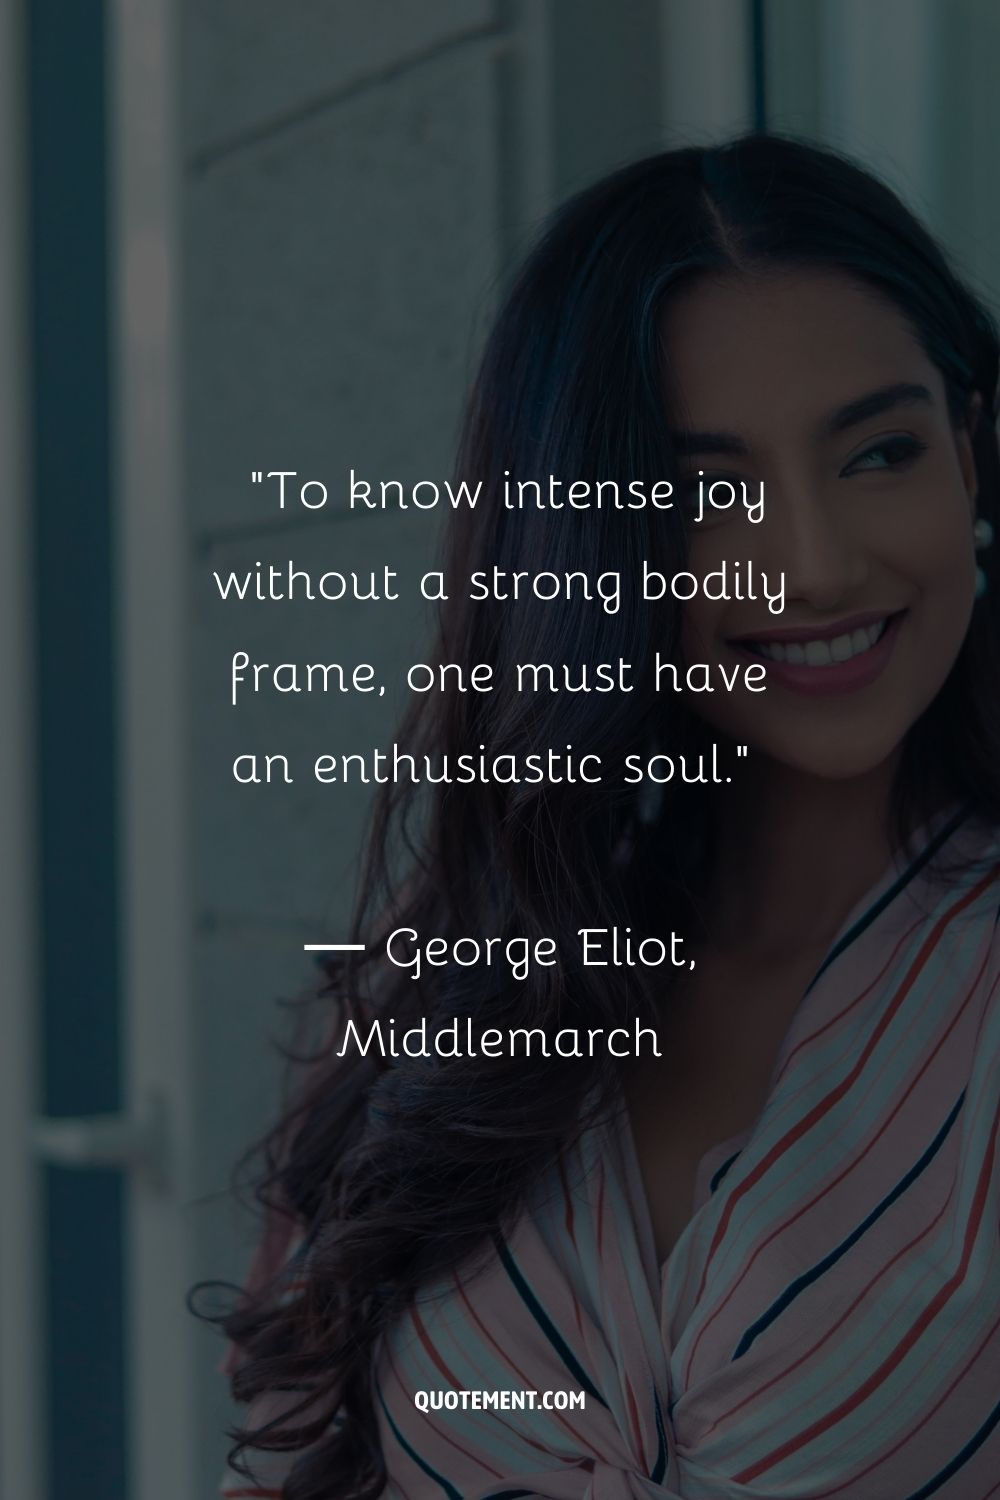 To know intense joy without a strong bodily frame, one must have an enthusiastic soul